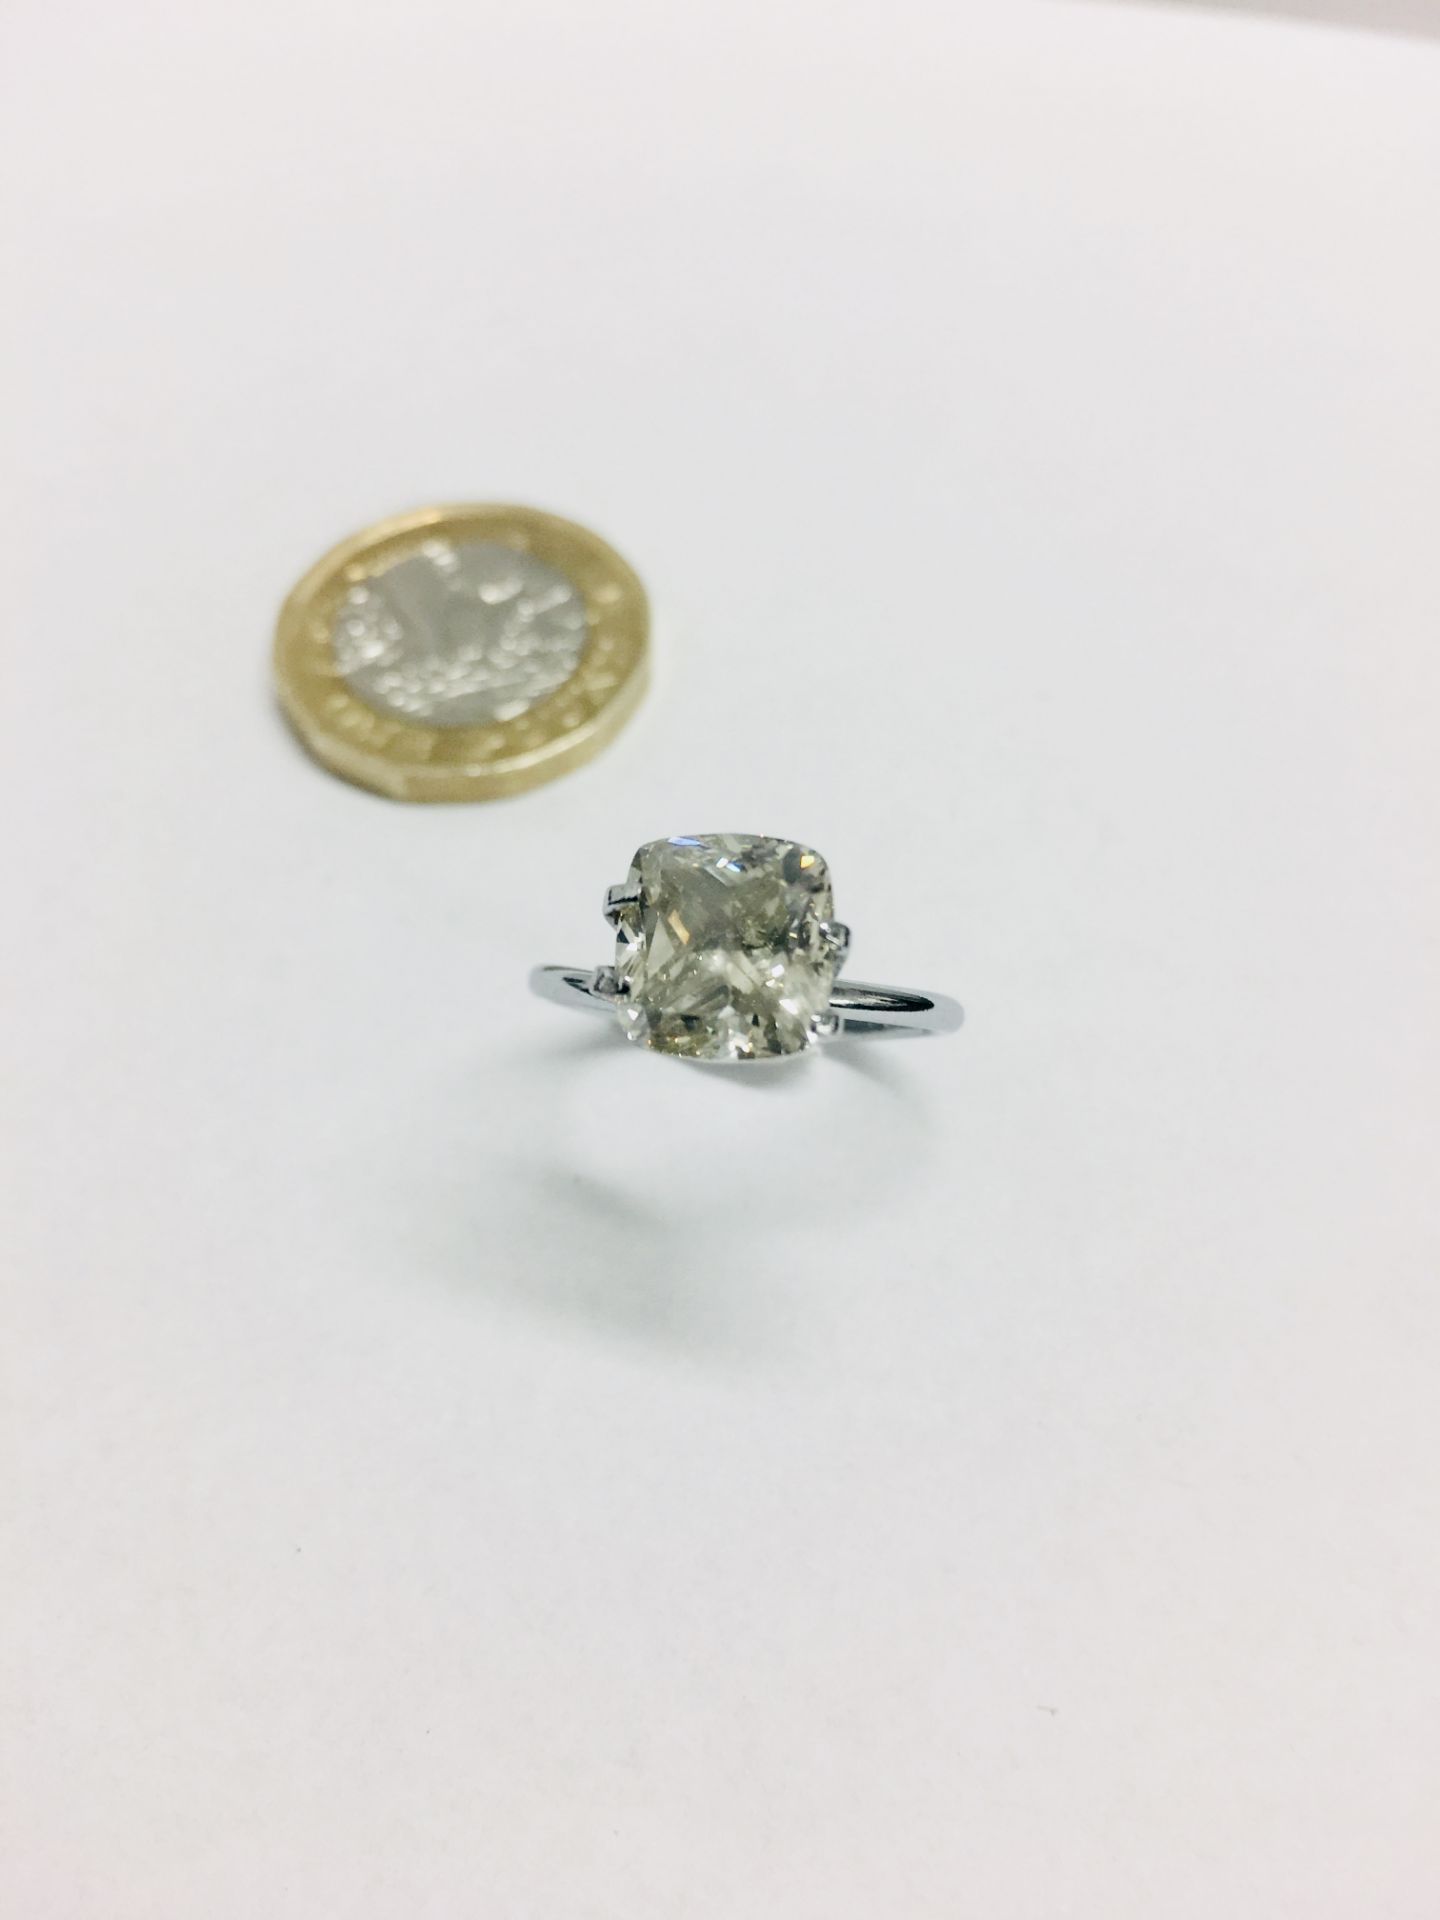 3.19ct Cushion shape diamond fancy grey colour si2 clarity,appraised at 15000 - Image 2 of 2